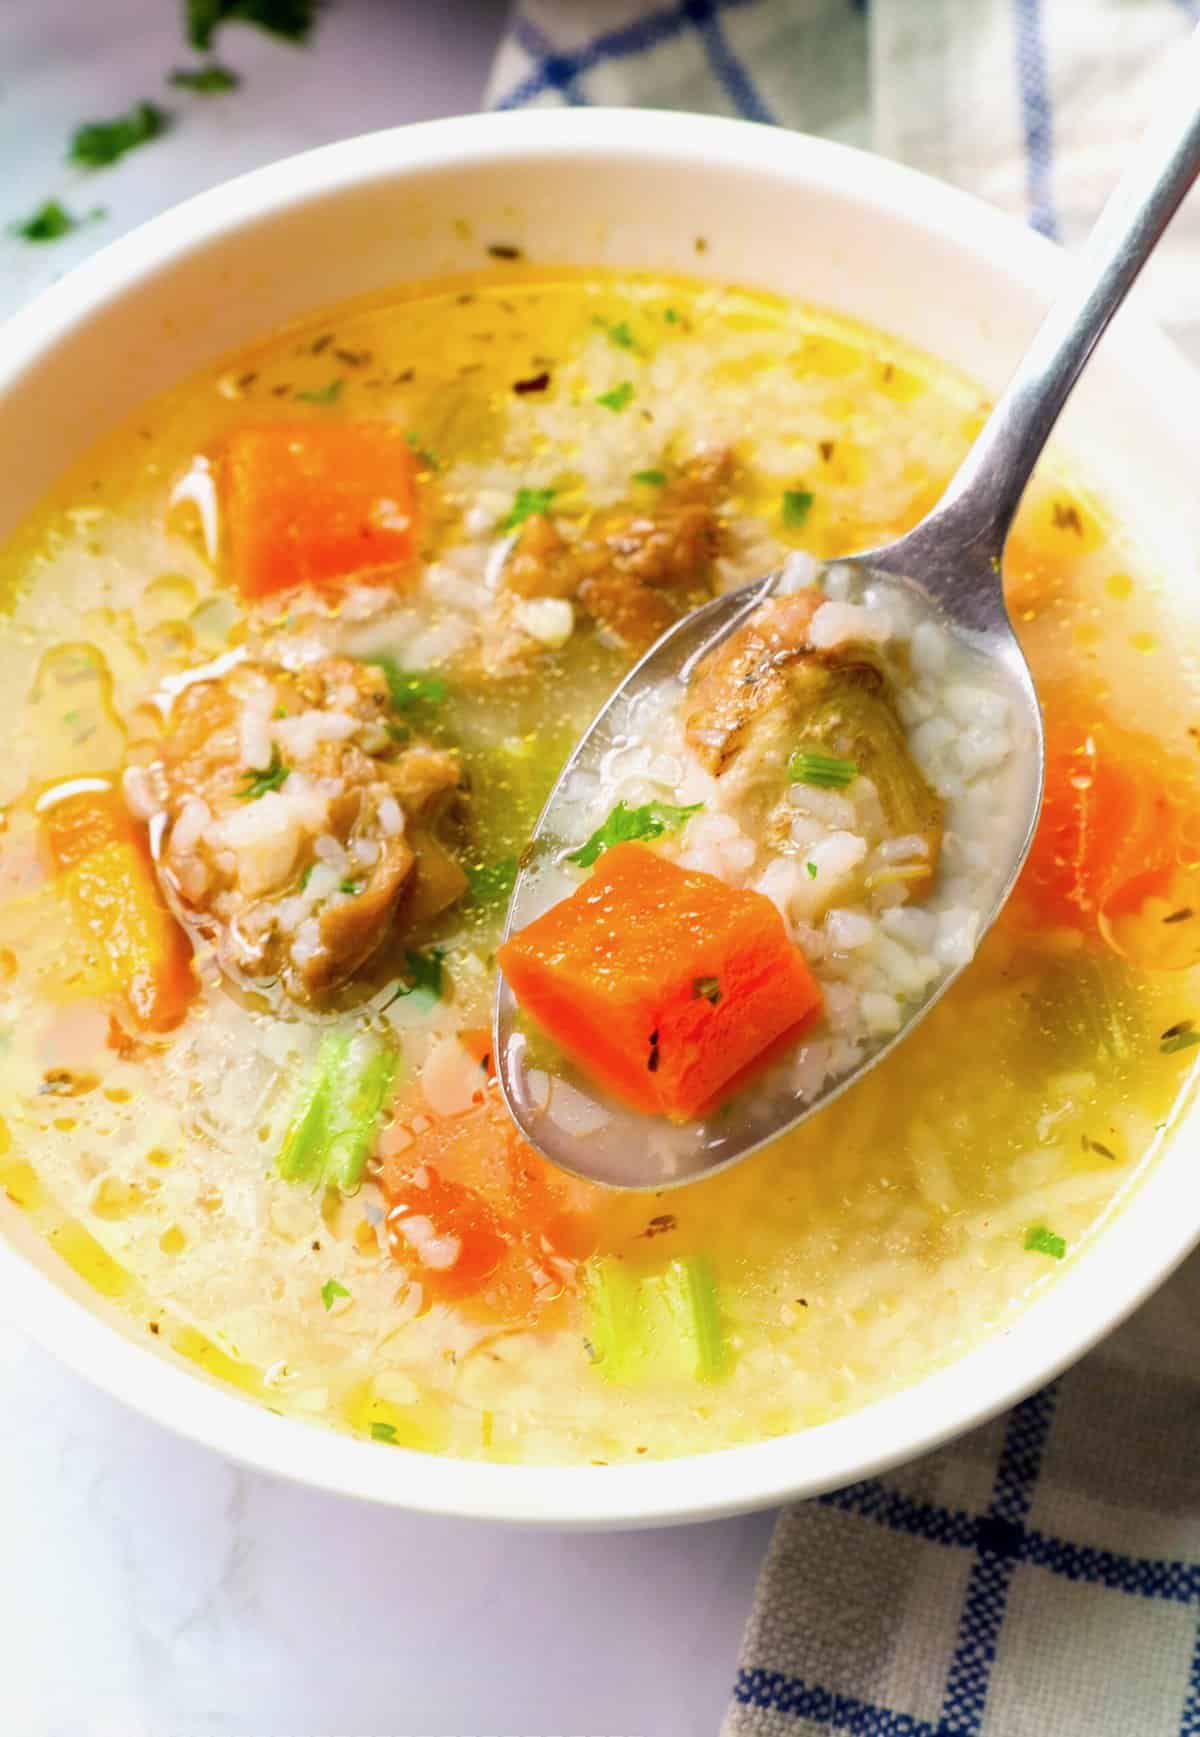 Enjoy Chicken and Rice Soup